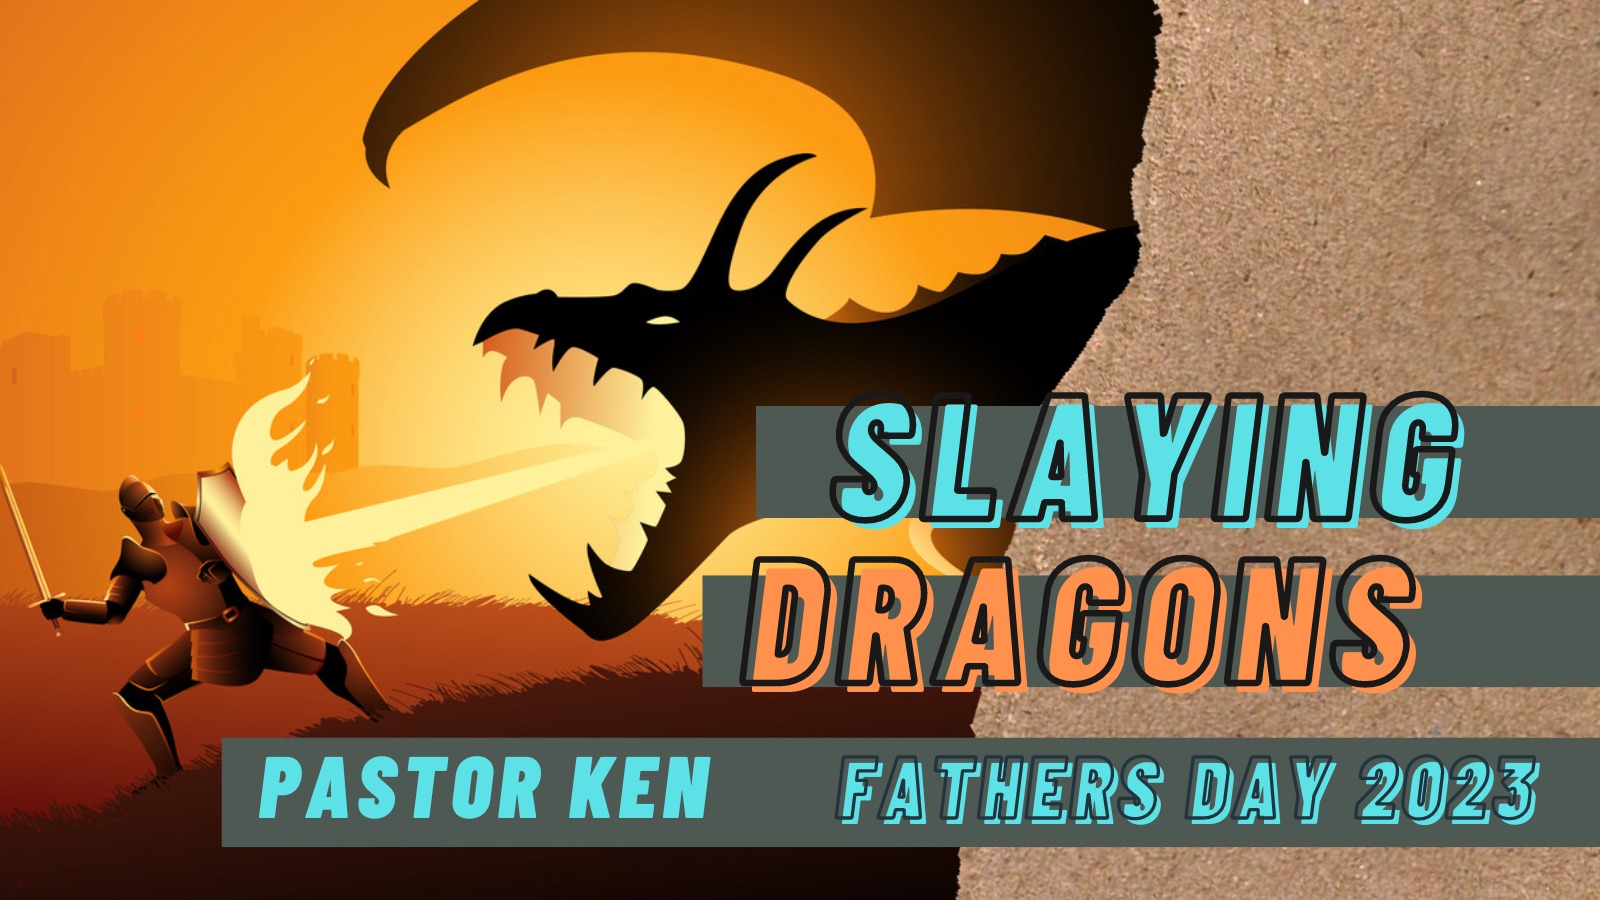 Fathers Day 2023 – Slaying Dragons